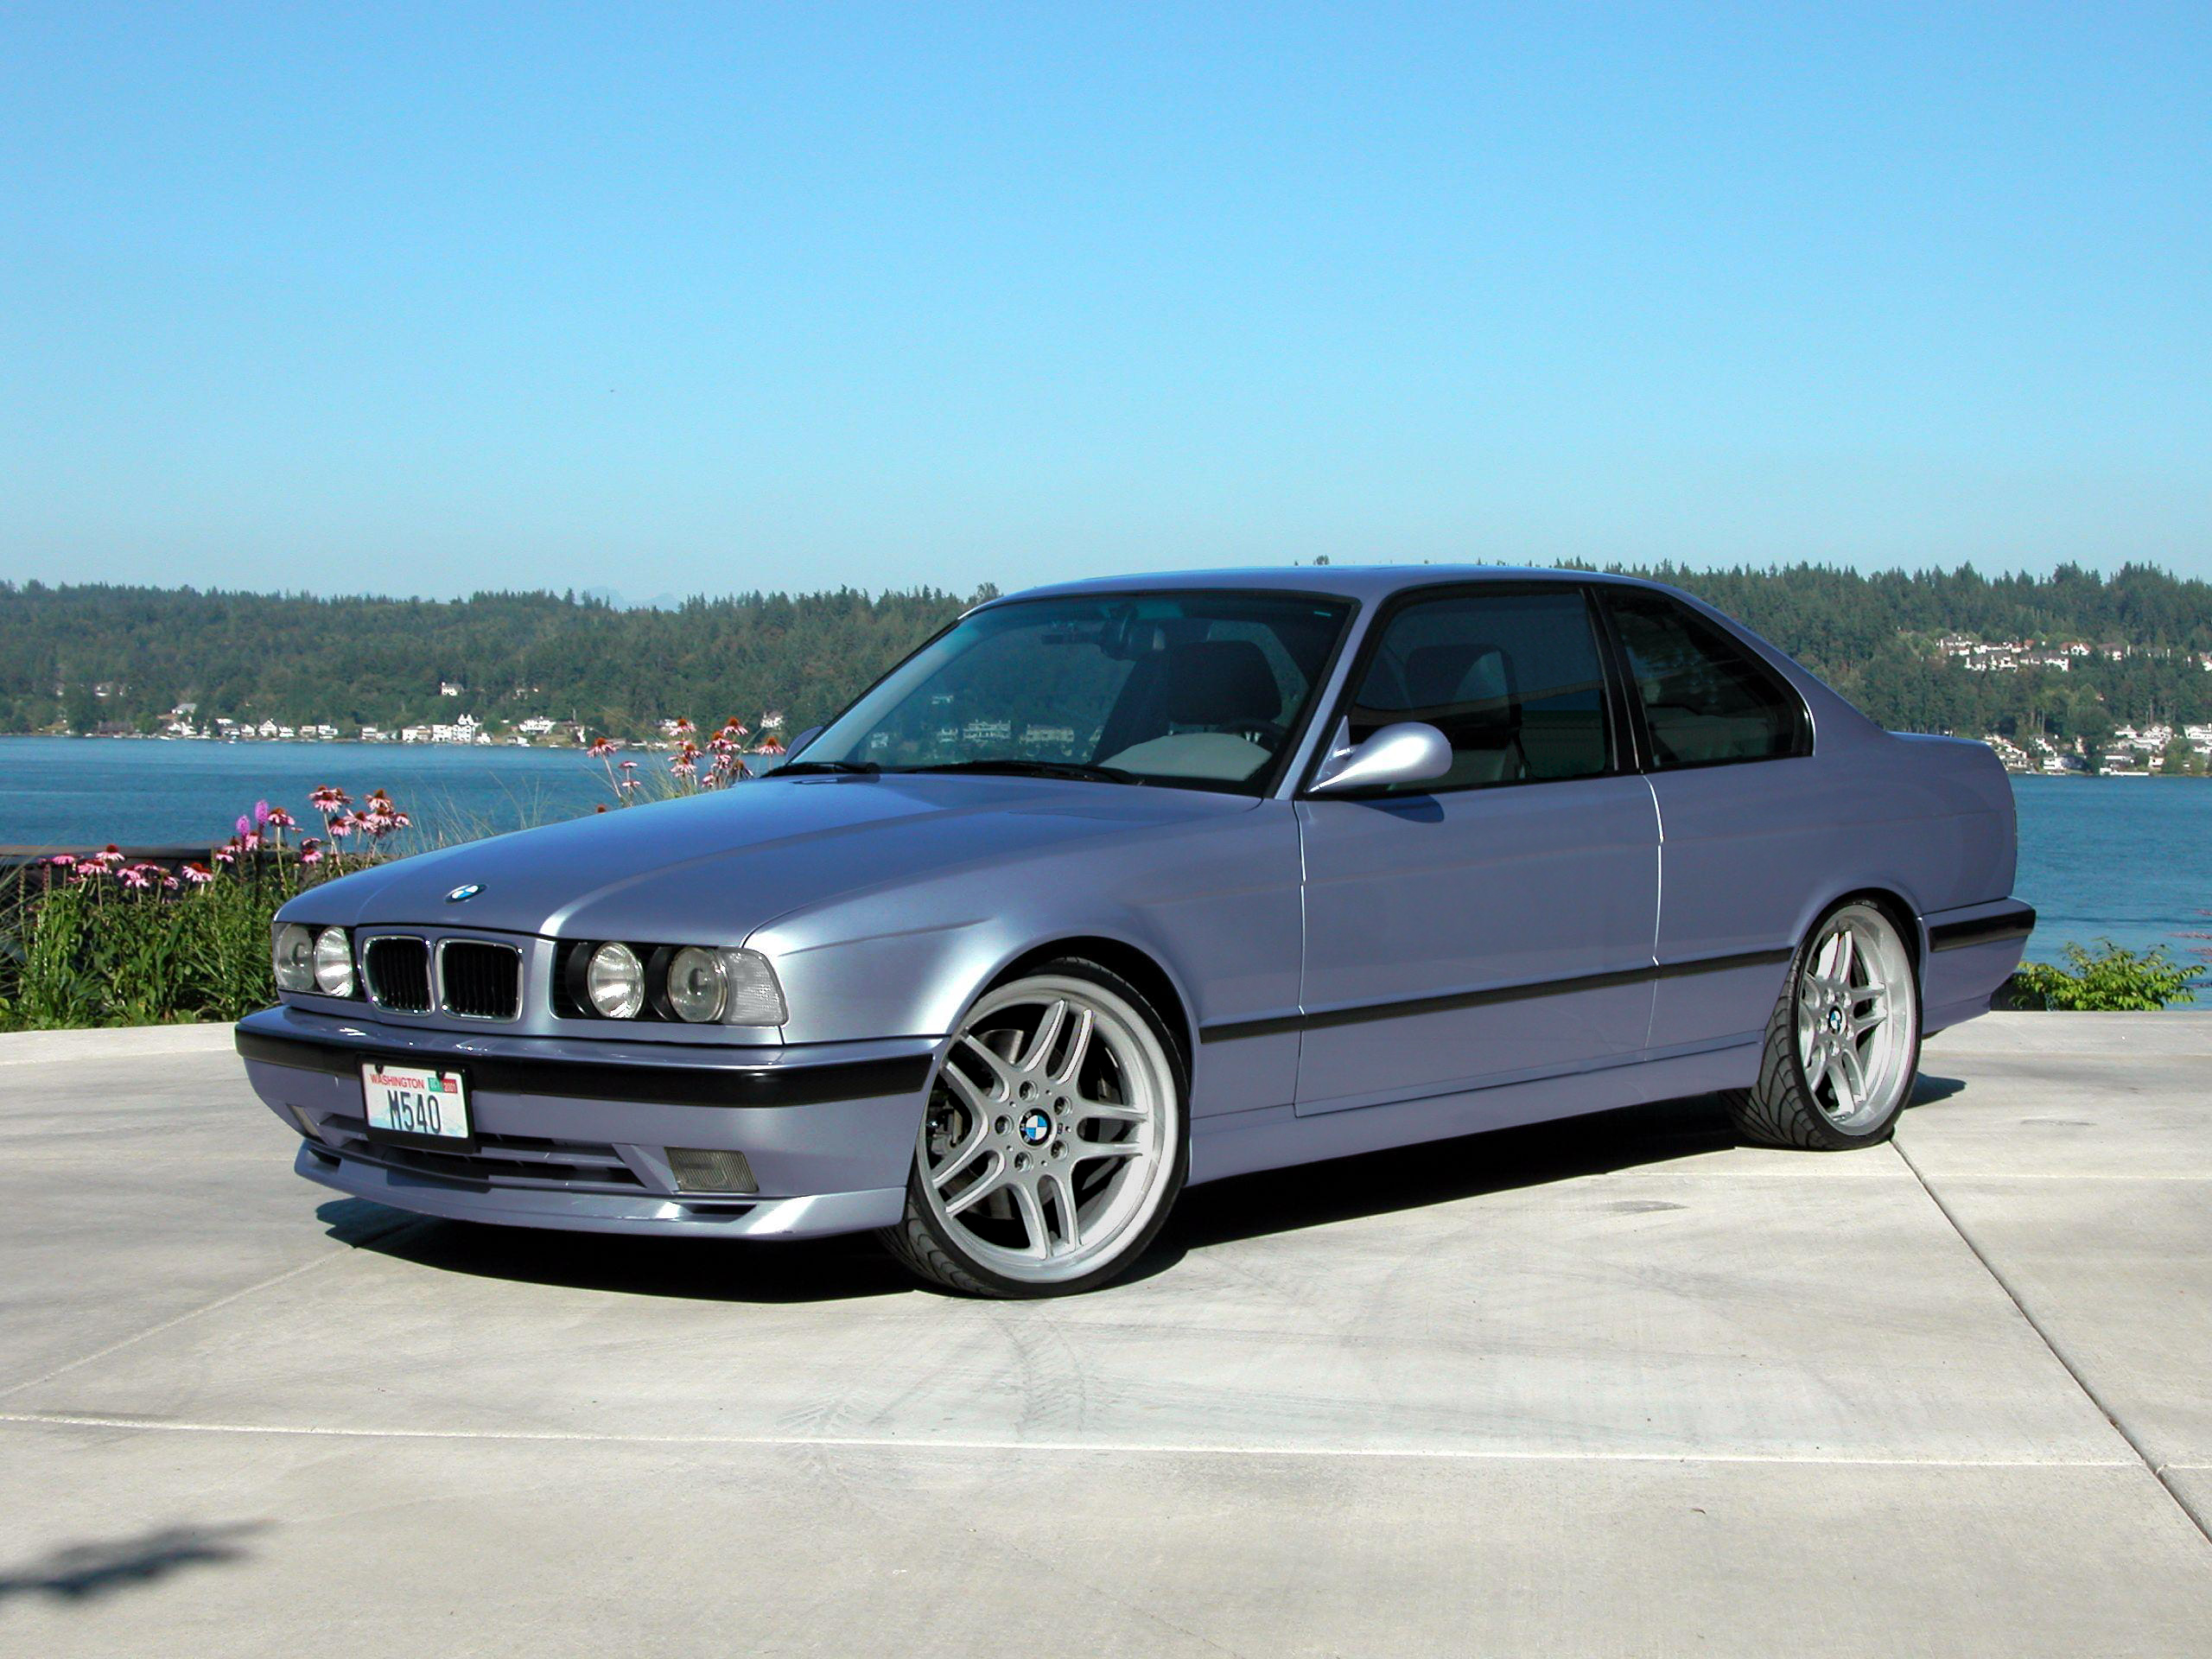 BMW 540 1995 Review, Amazing Pictures and Images Look